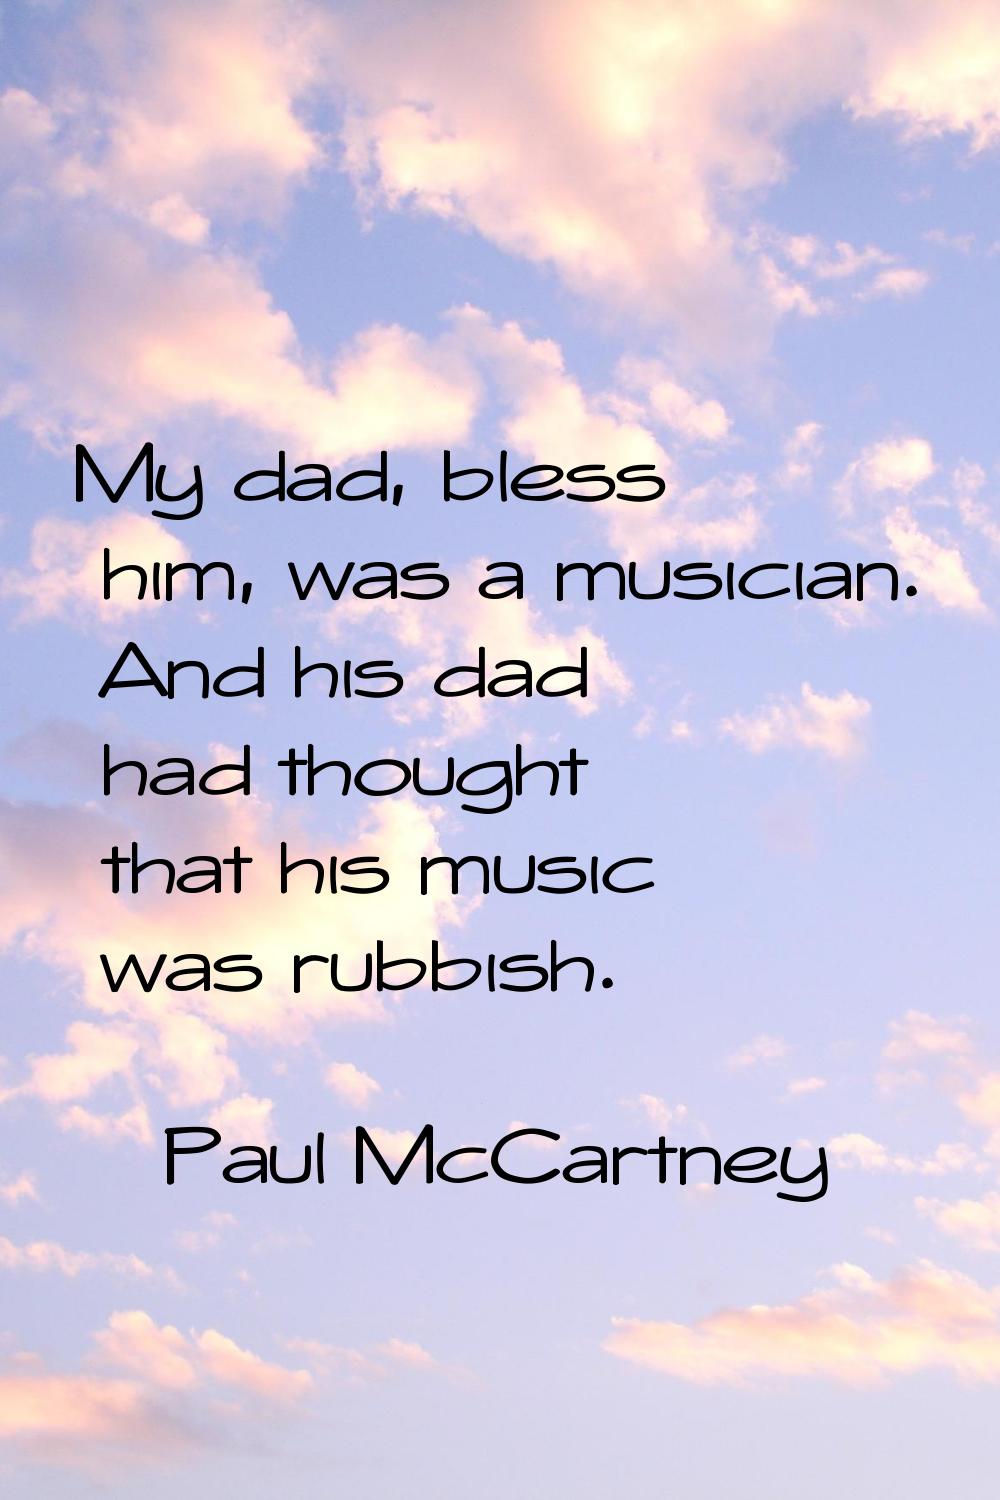 My dad, bless him, was a musician. And his dad had thought that his music was rubbish.